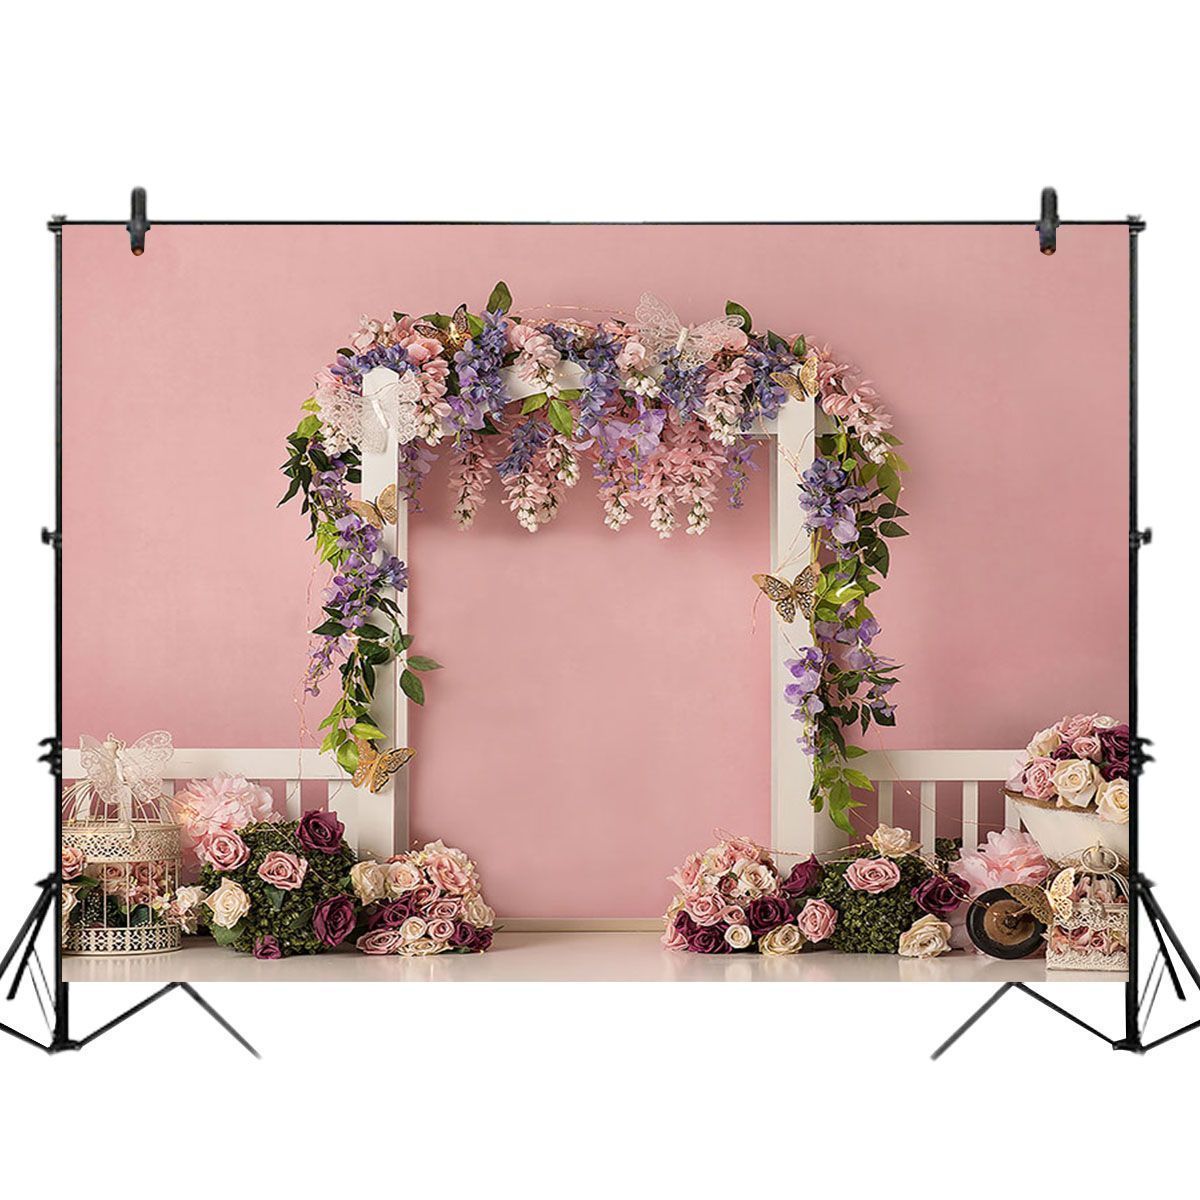 5x3FT-7x5FT-9x6FT-Pink-Wall-Rose-Flower-Decor-Photography-Backdrop-Background-Studio-Prop-1636951